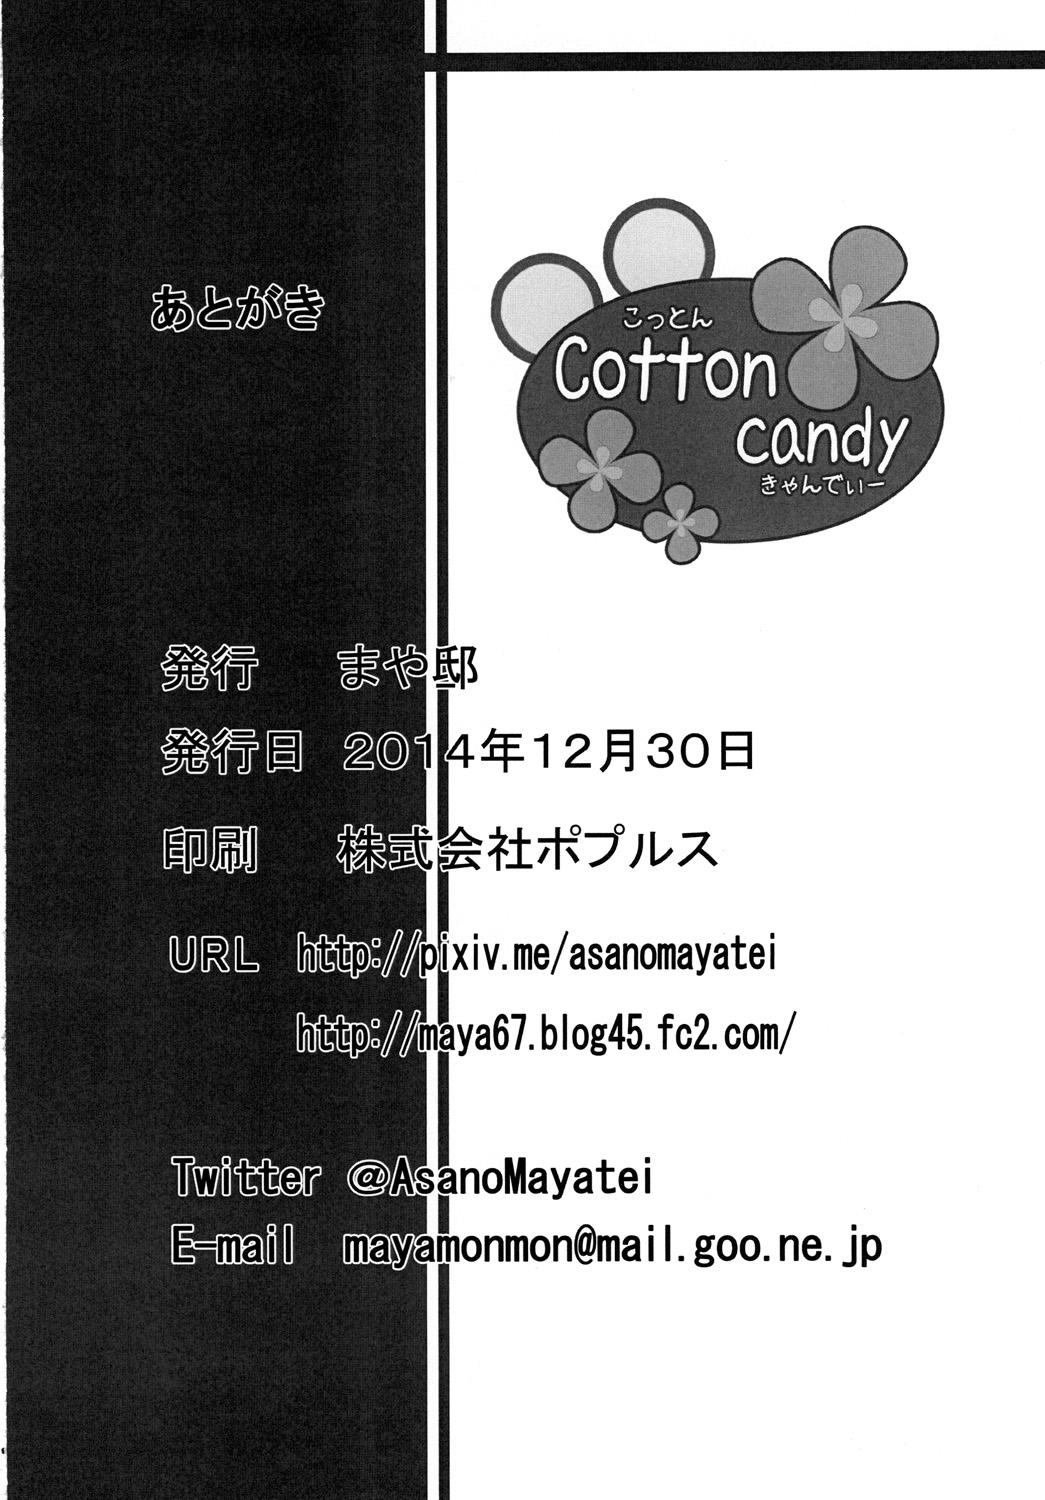 Cotton candy 24